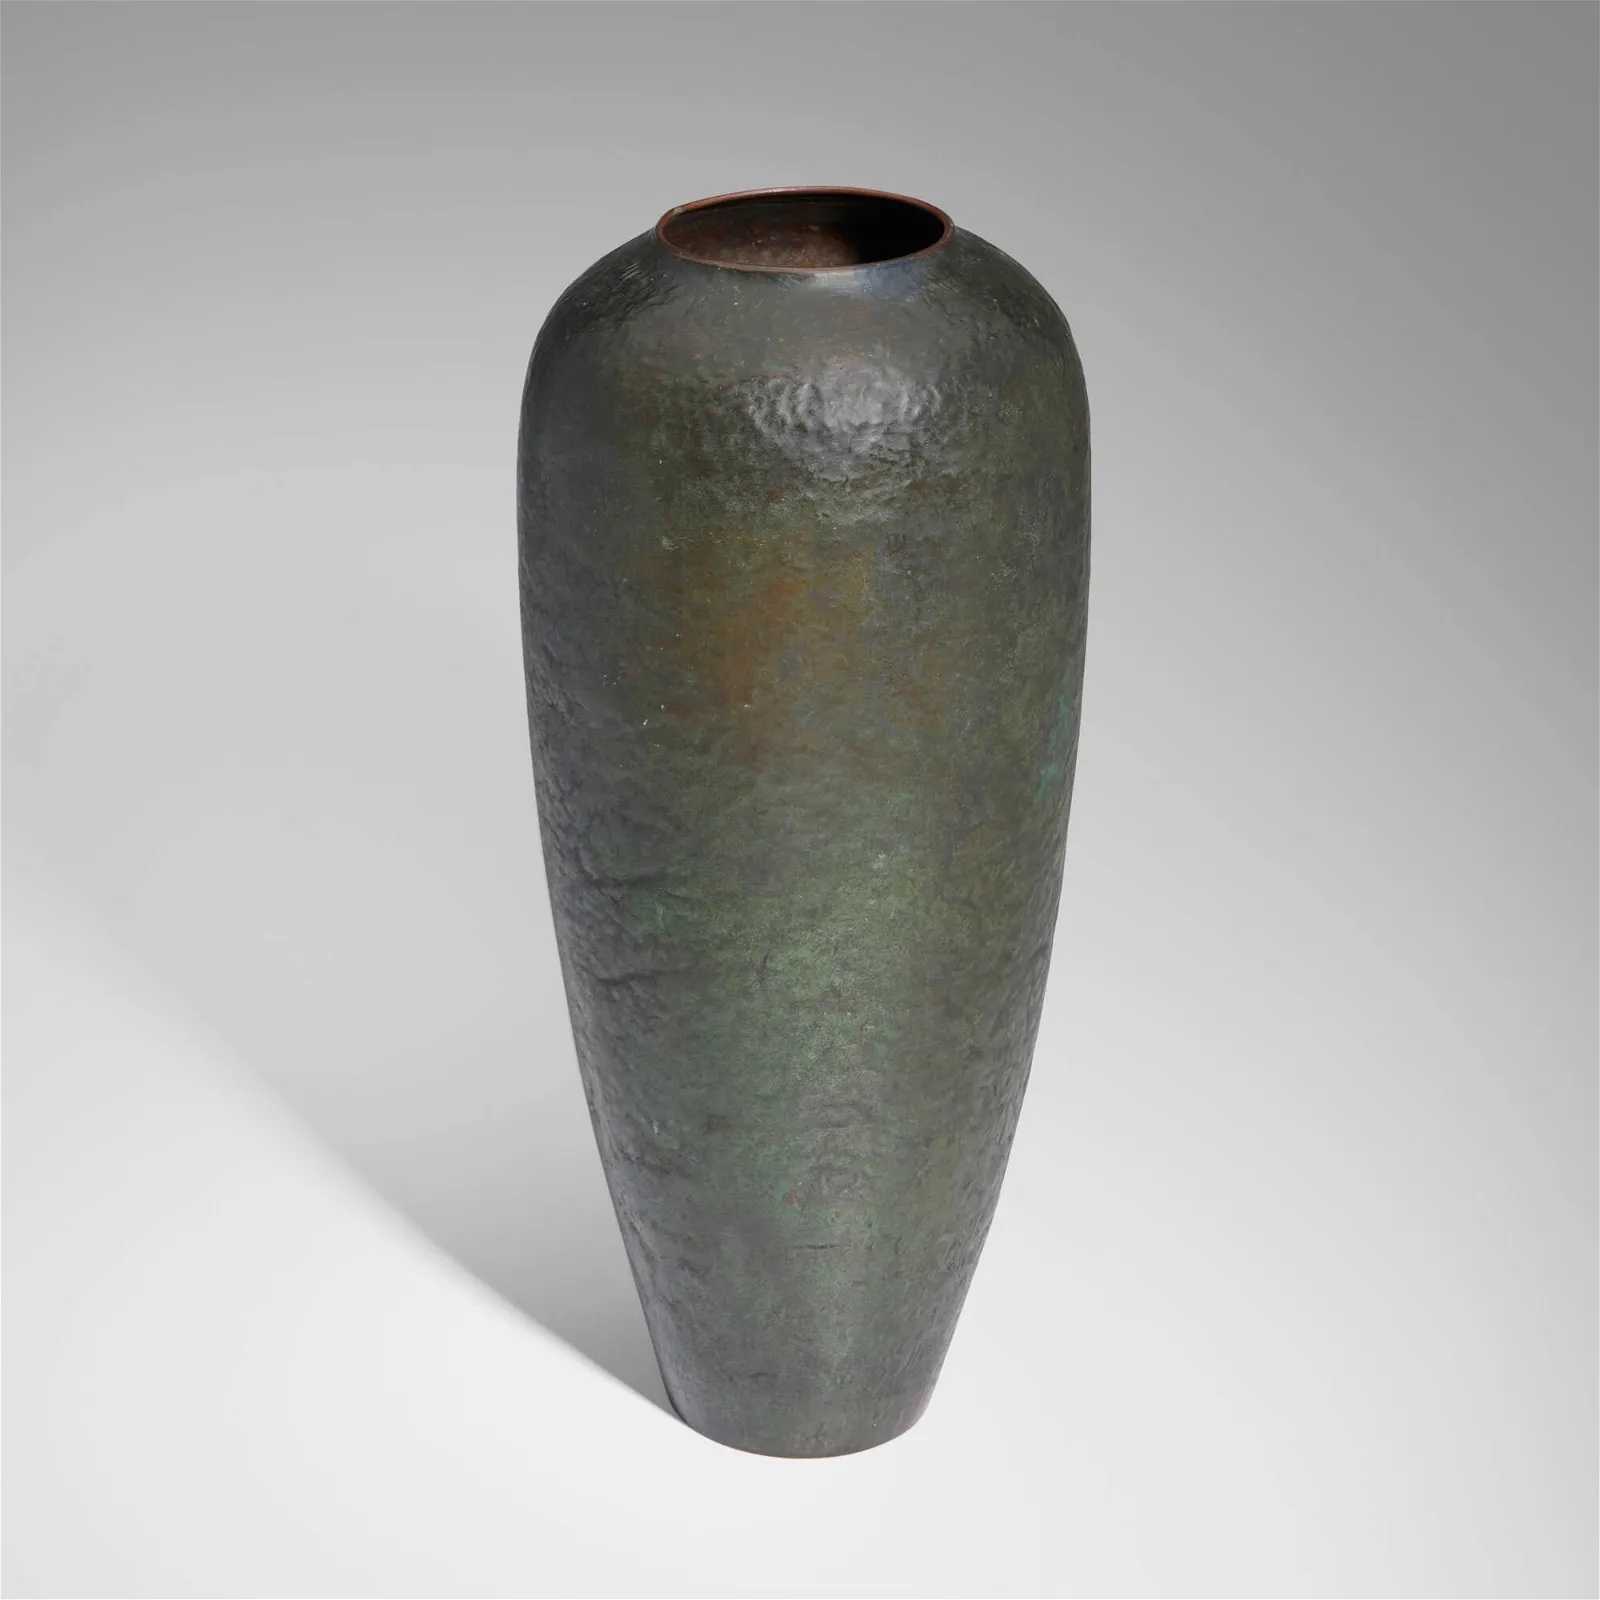 Fred Brosi for Ye Olde Copper Shoppe, Floor vase, which sold for $20,000 ($26,200 with buyer’s premium) at Toomey.